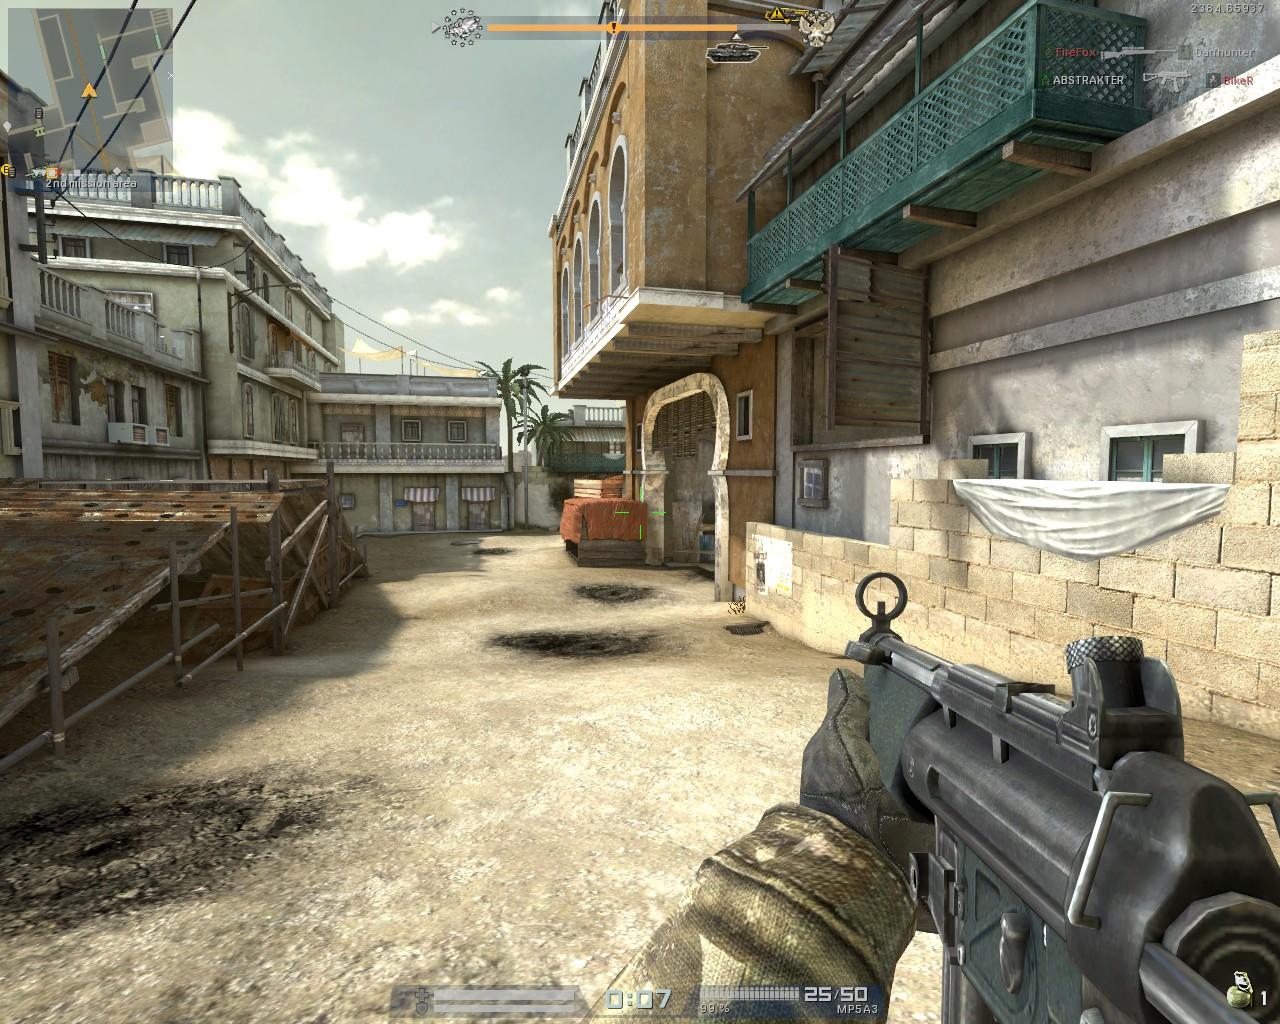 An example of a Shooter Game